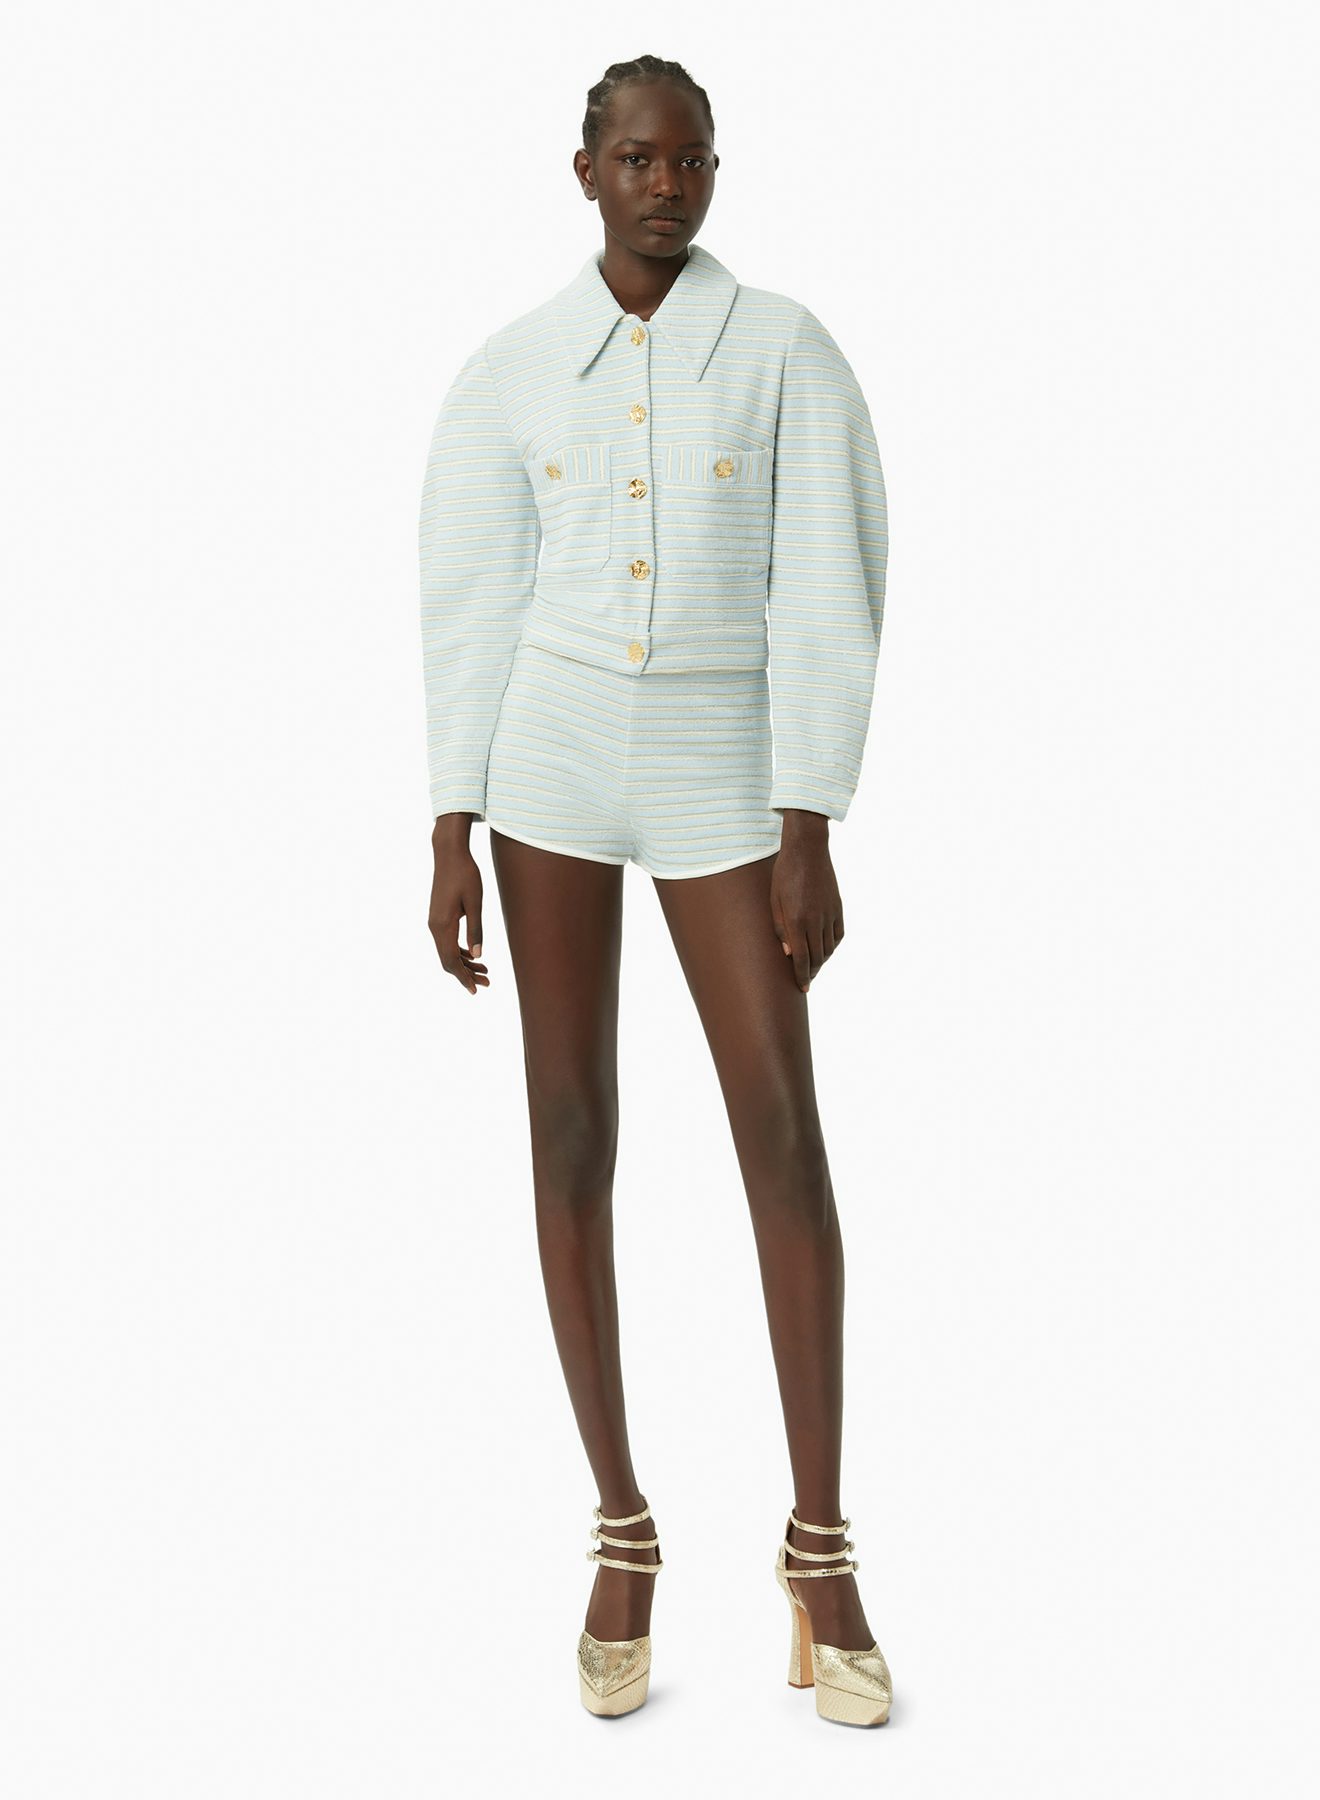 Striped terry cotton hotpants in blue and gold - Nina Ricci